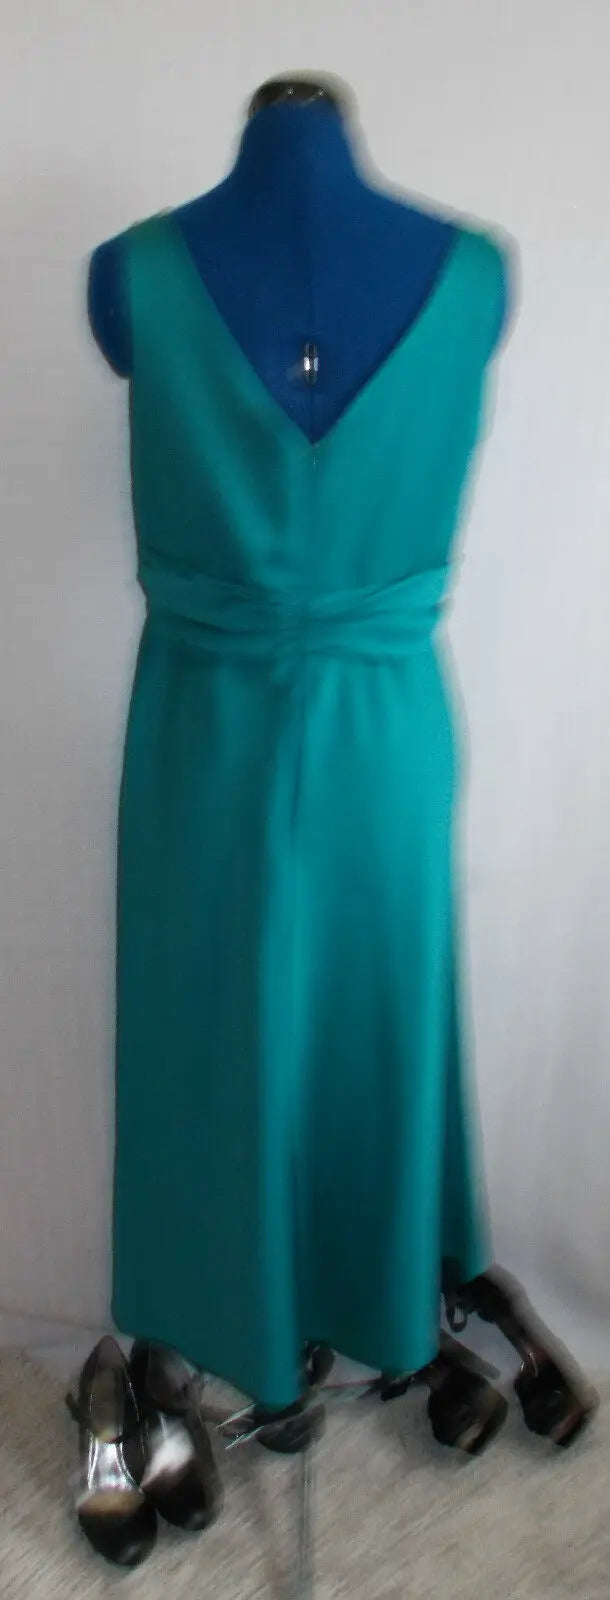 Teale Cocktail dress.size 12, ruffle waist, cross-over bodice design.lined. Teatro